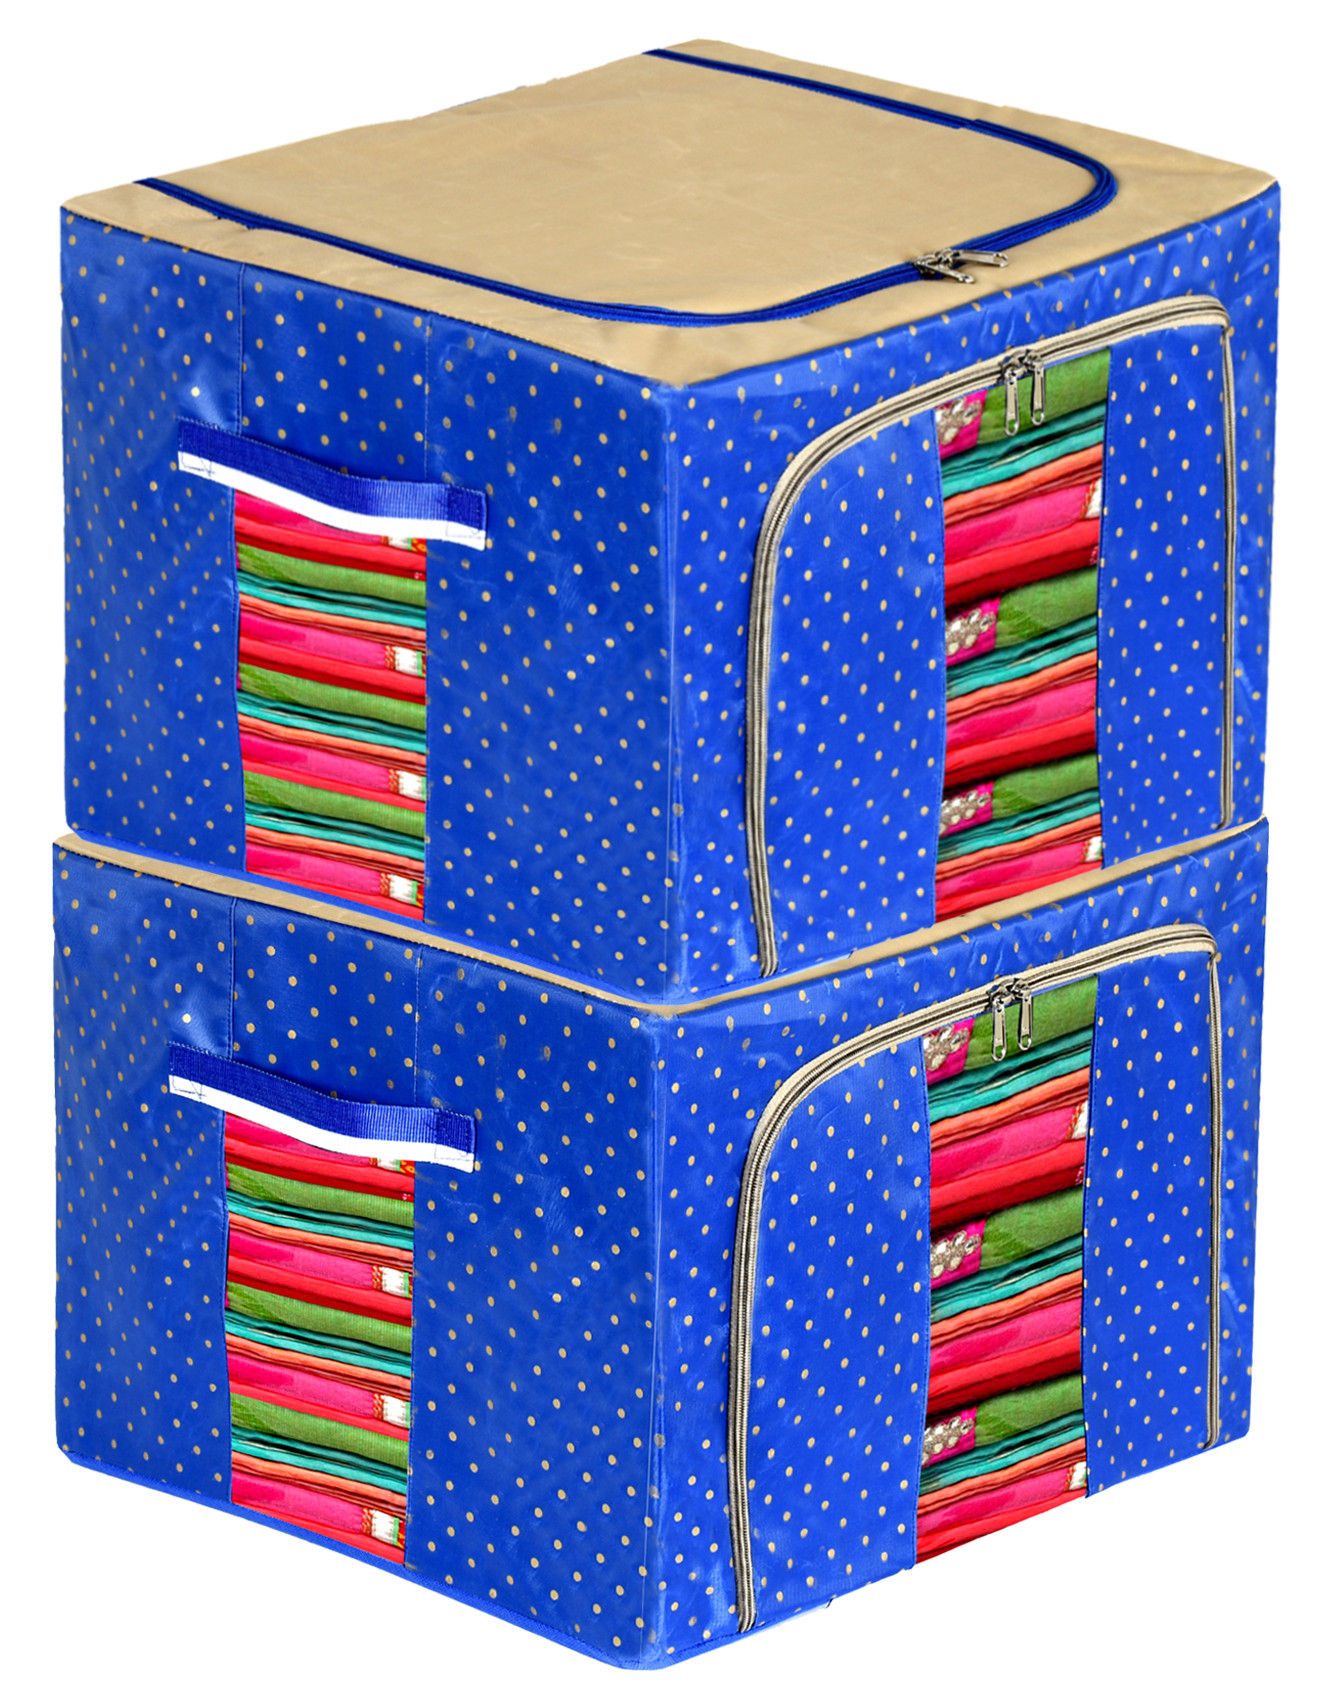 Kuber Industries Dot Printed Steel Frame Storage Box/Organizer For Clothing, Blankets, Bedding With Clear Window, 24Ltr. (Blue & Brown)-44KM0217